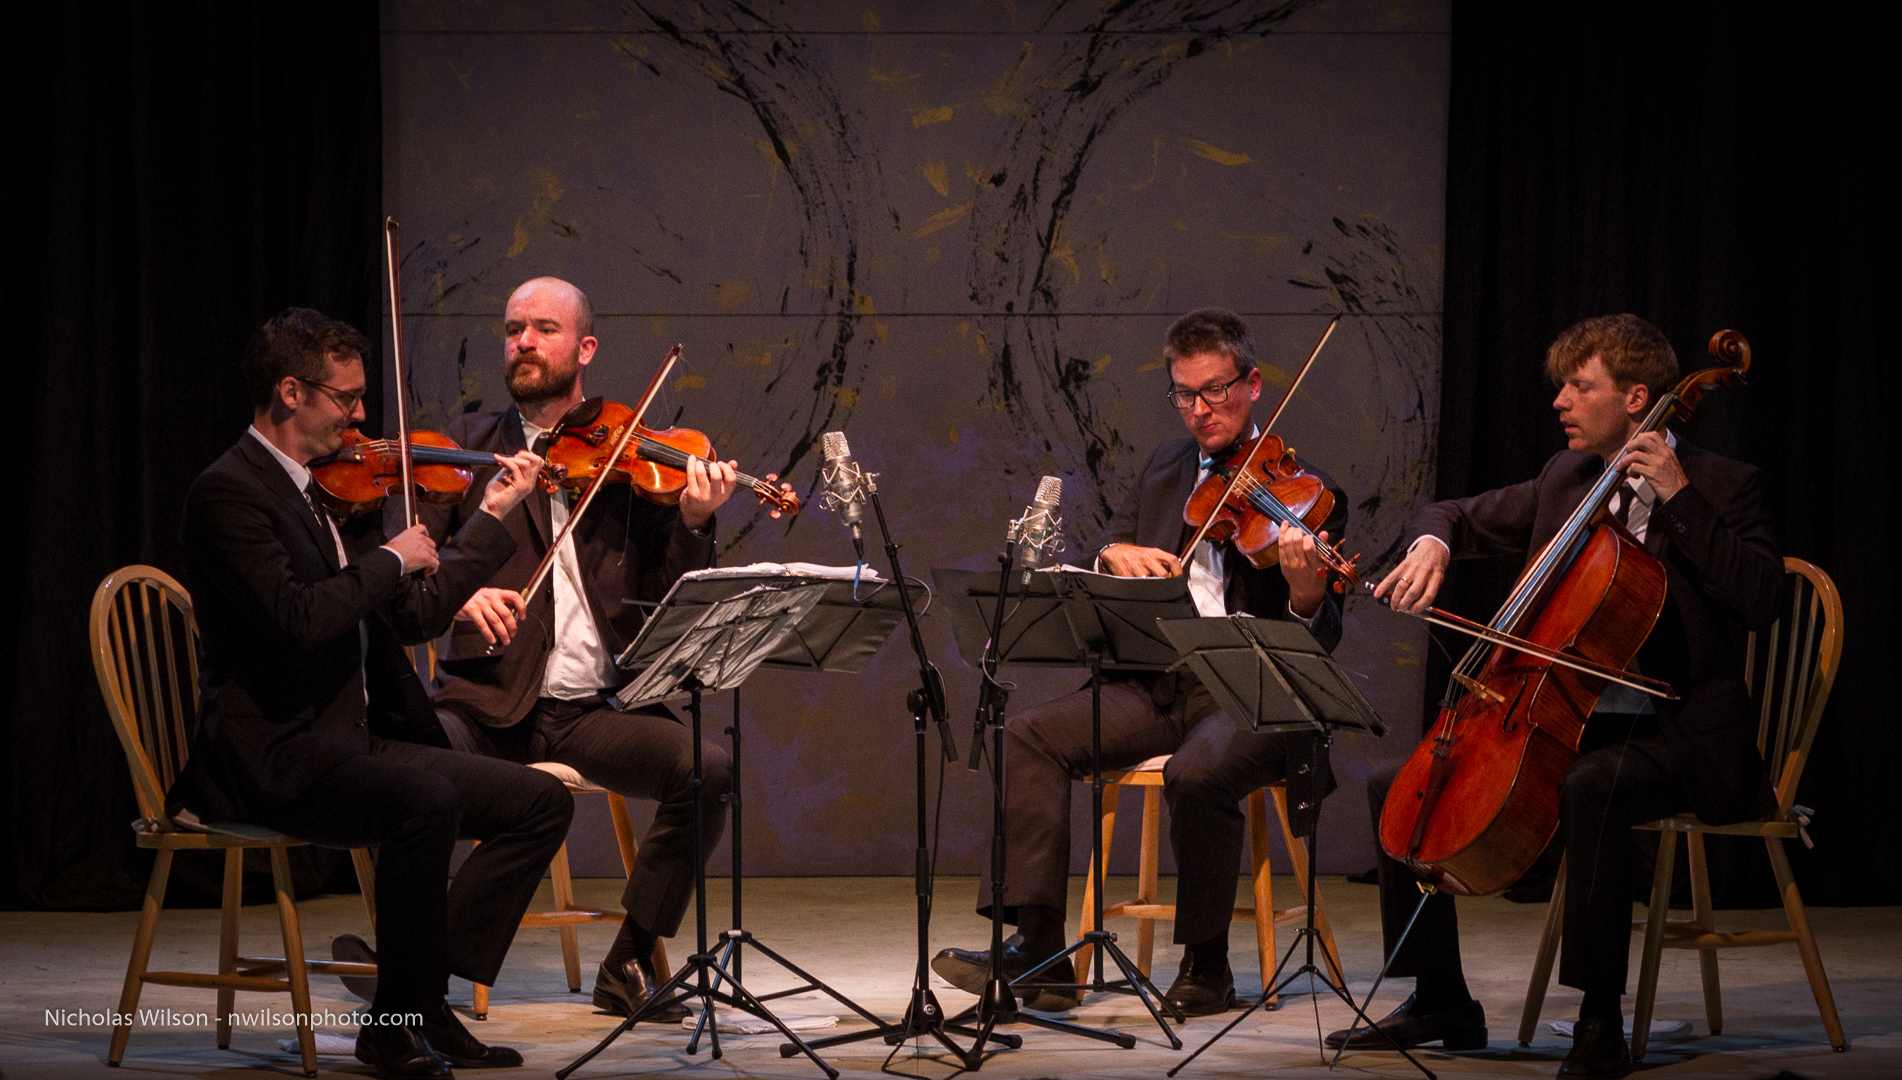 The Calder Quartet performed in the concert hall tent Monday afternoon.